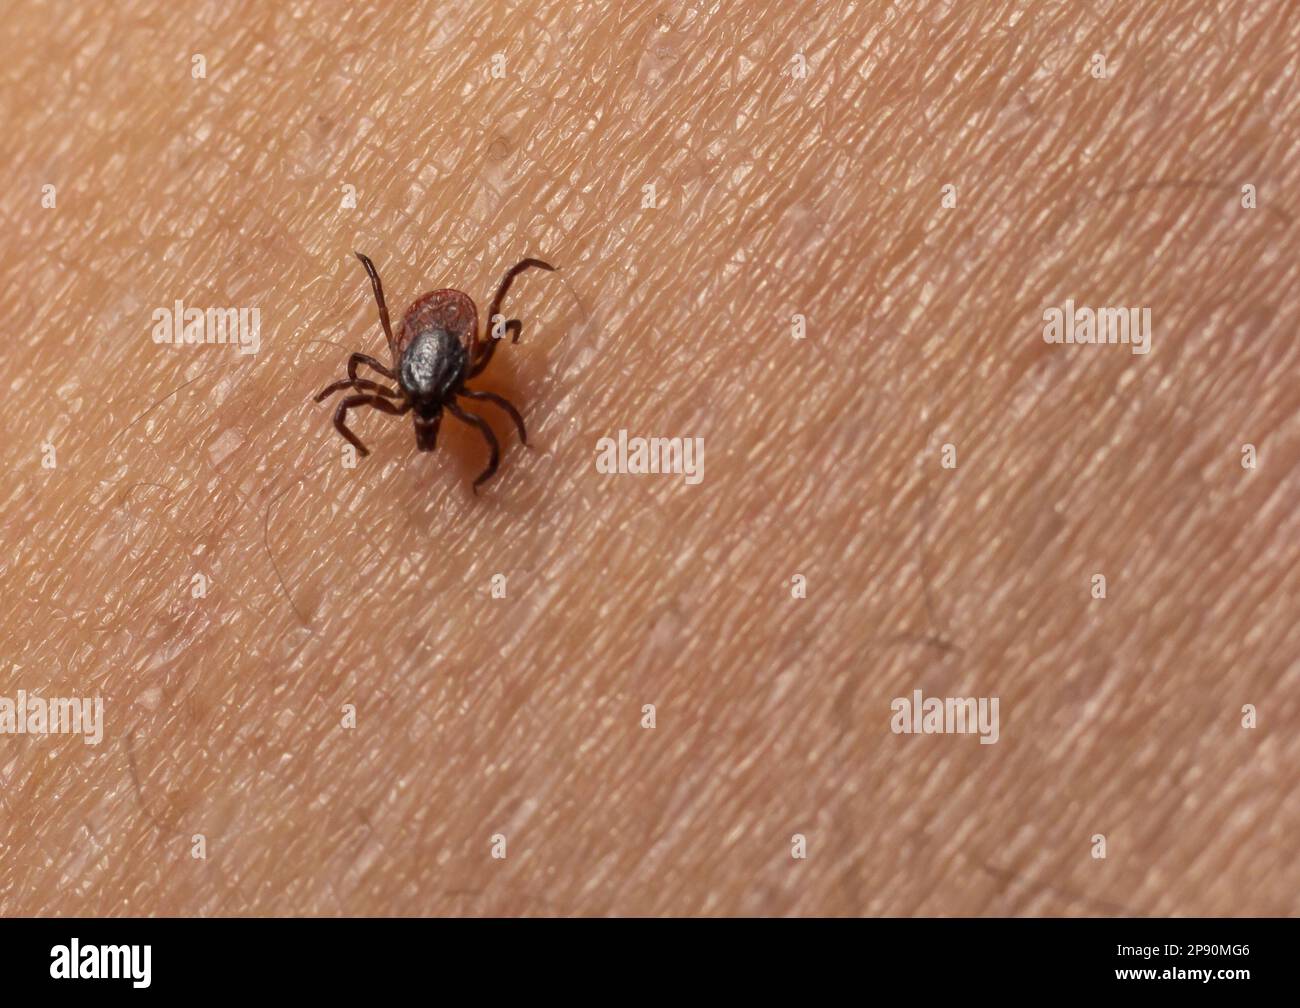 Infected female deer tick on hairy human skin. Ixodes ricinus. Parasitic mite. Acarus. Dangerous biting insect on background of epidermis detail. Disg Stock Photo